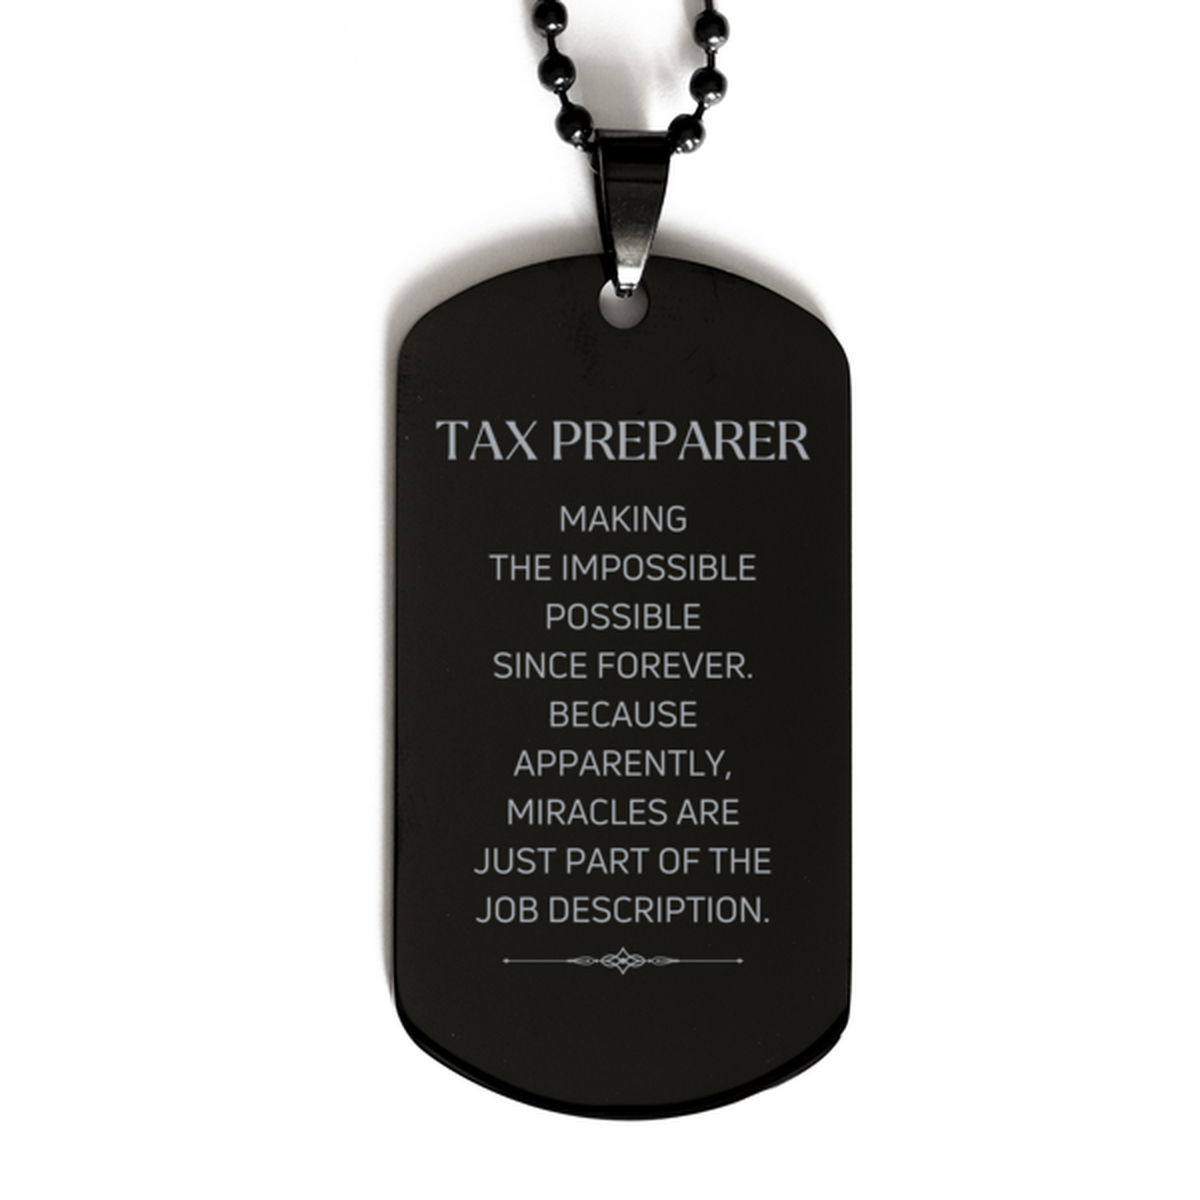 Funny Tax Preparer Gifts, Miracles are just part of the job description, Inspirational Birthday Black Dog Tag For Tax Preparer, Men, Women, Coworkers, Friends, Boss